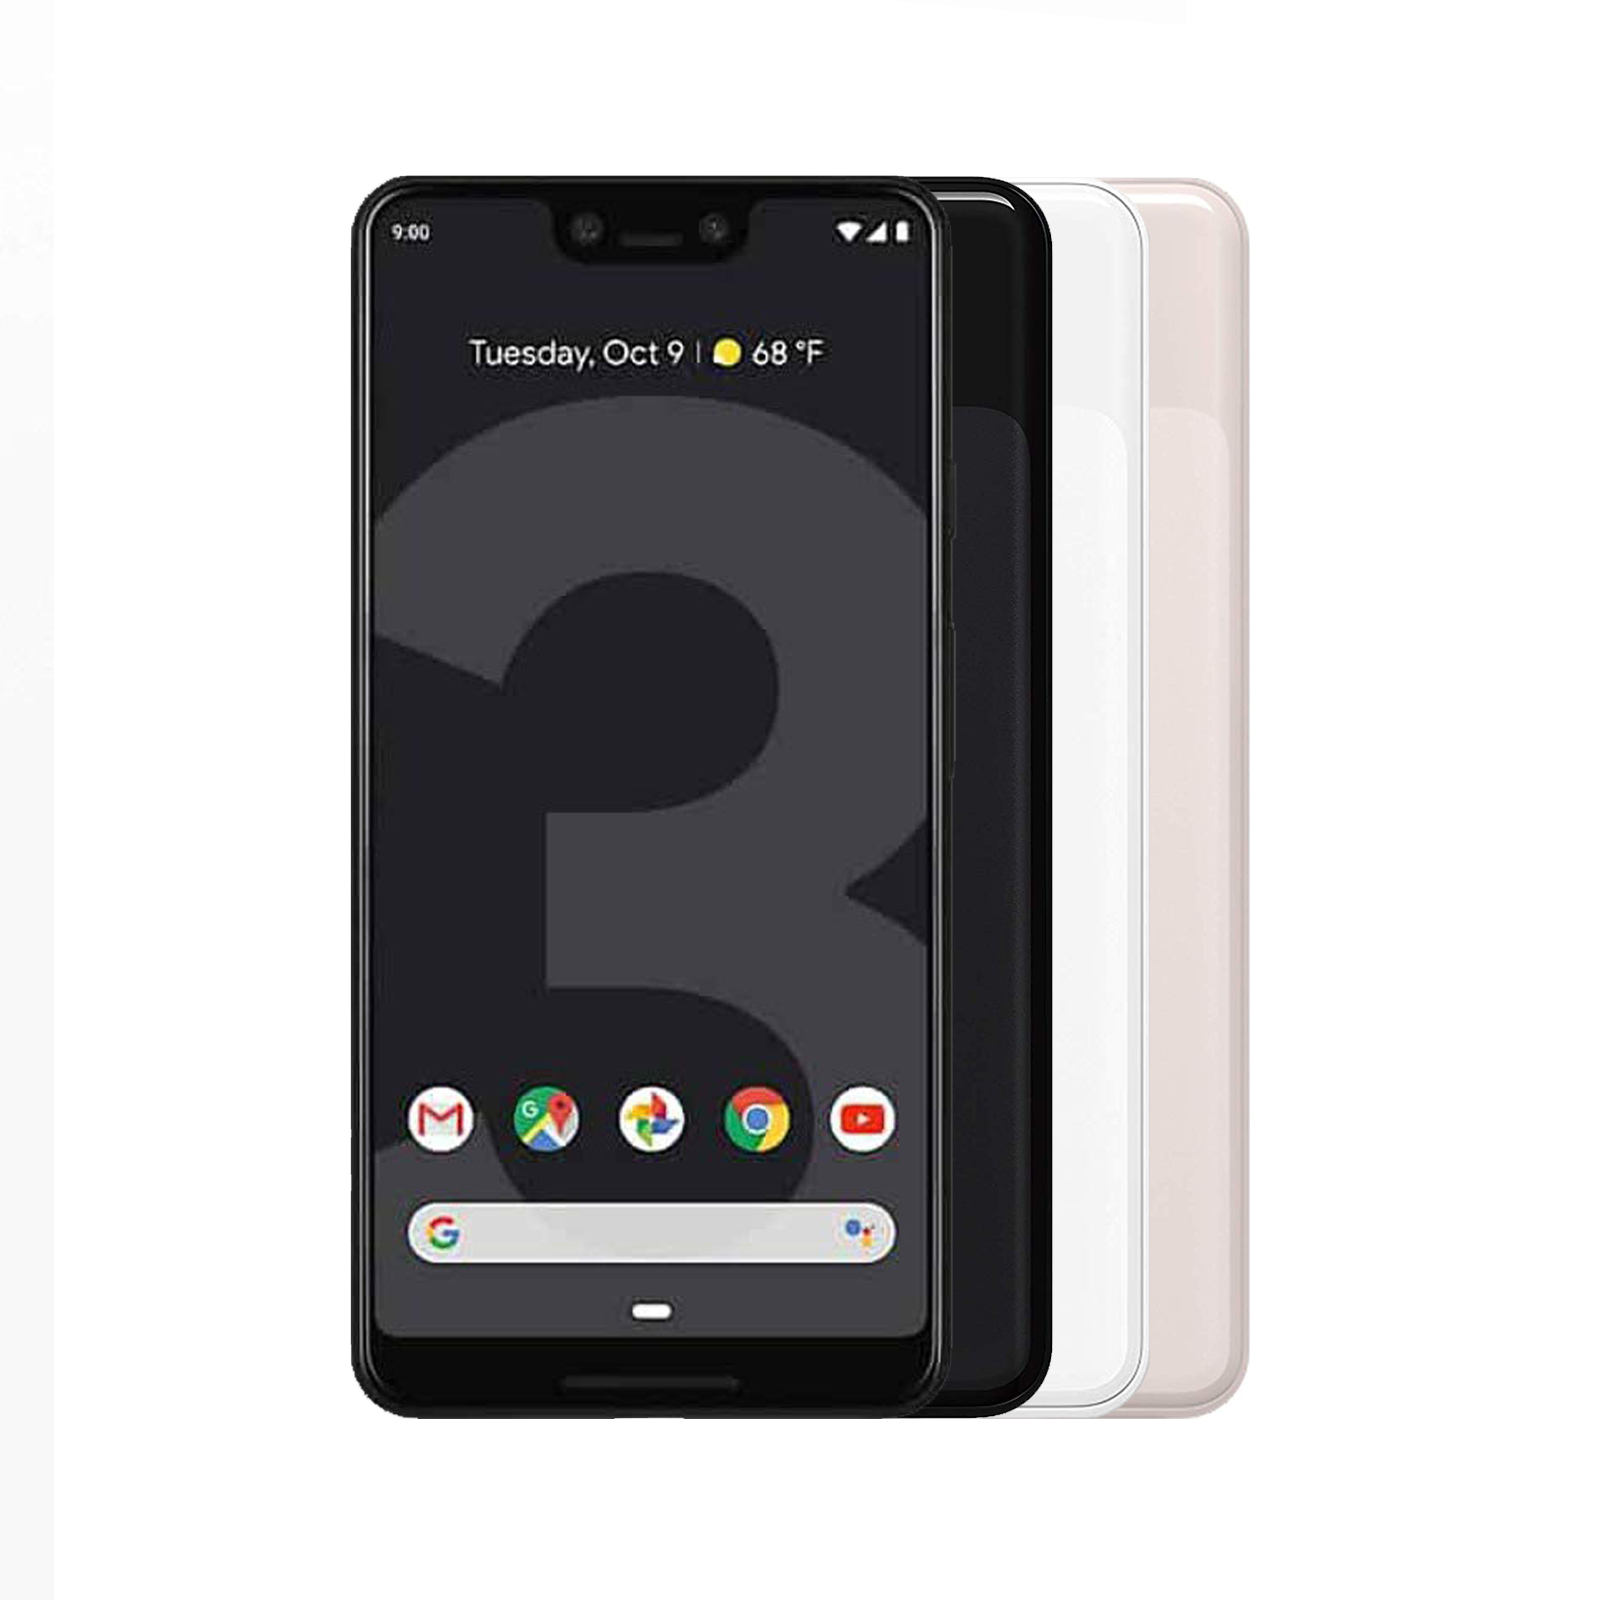 Google Pixel 3 XL - New Never Used